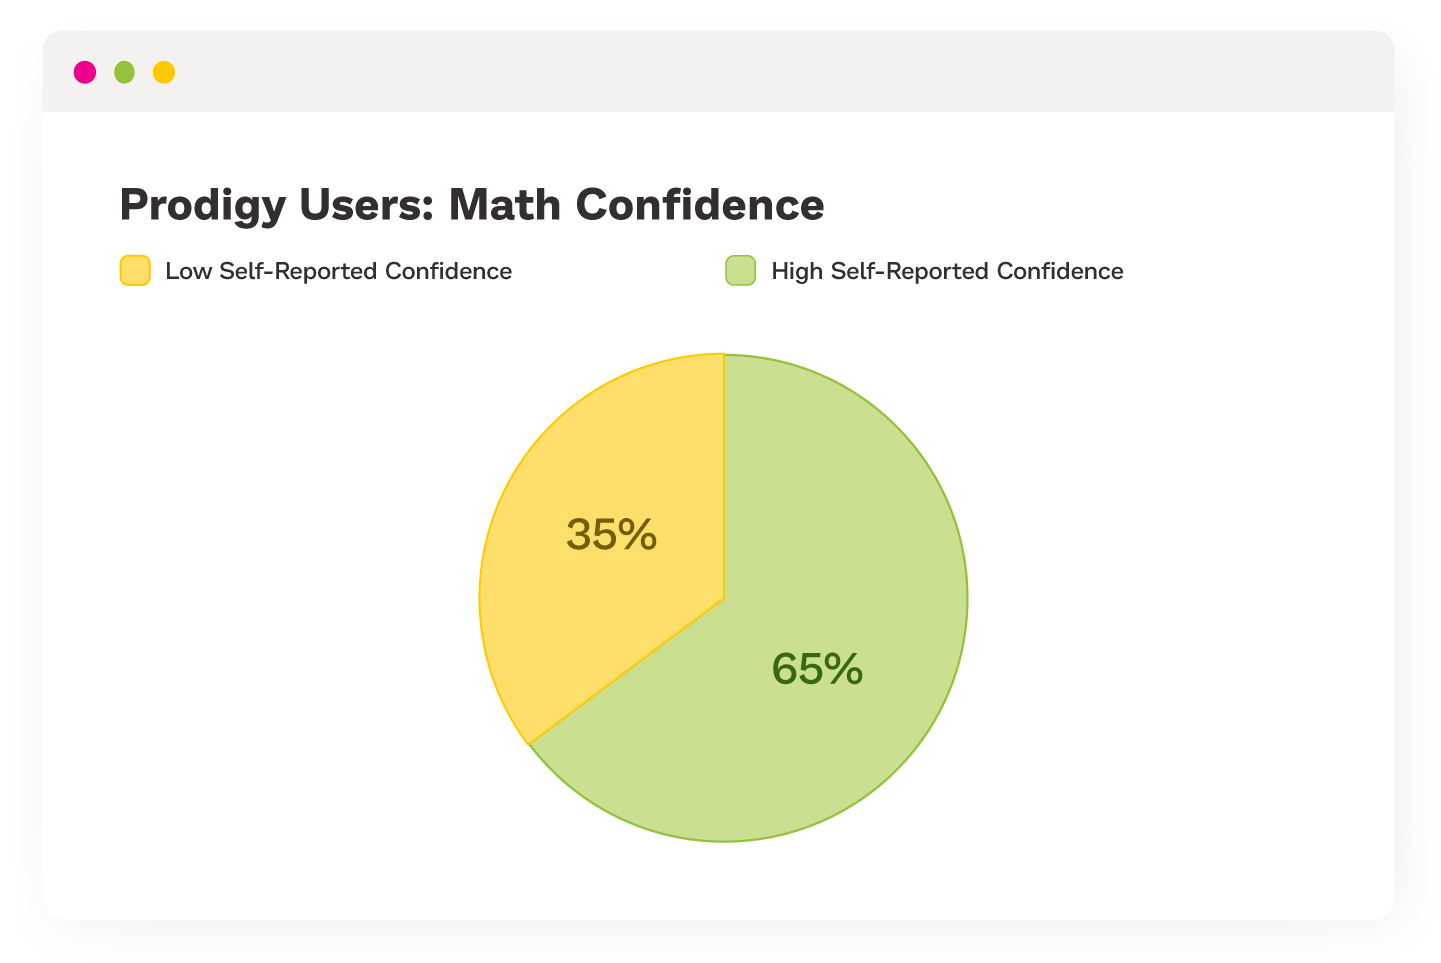 Pie chart showing that 65% of Prodigy users have high self-reported confidence. 